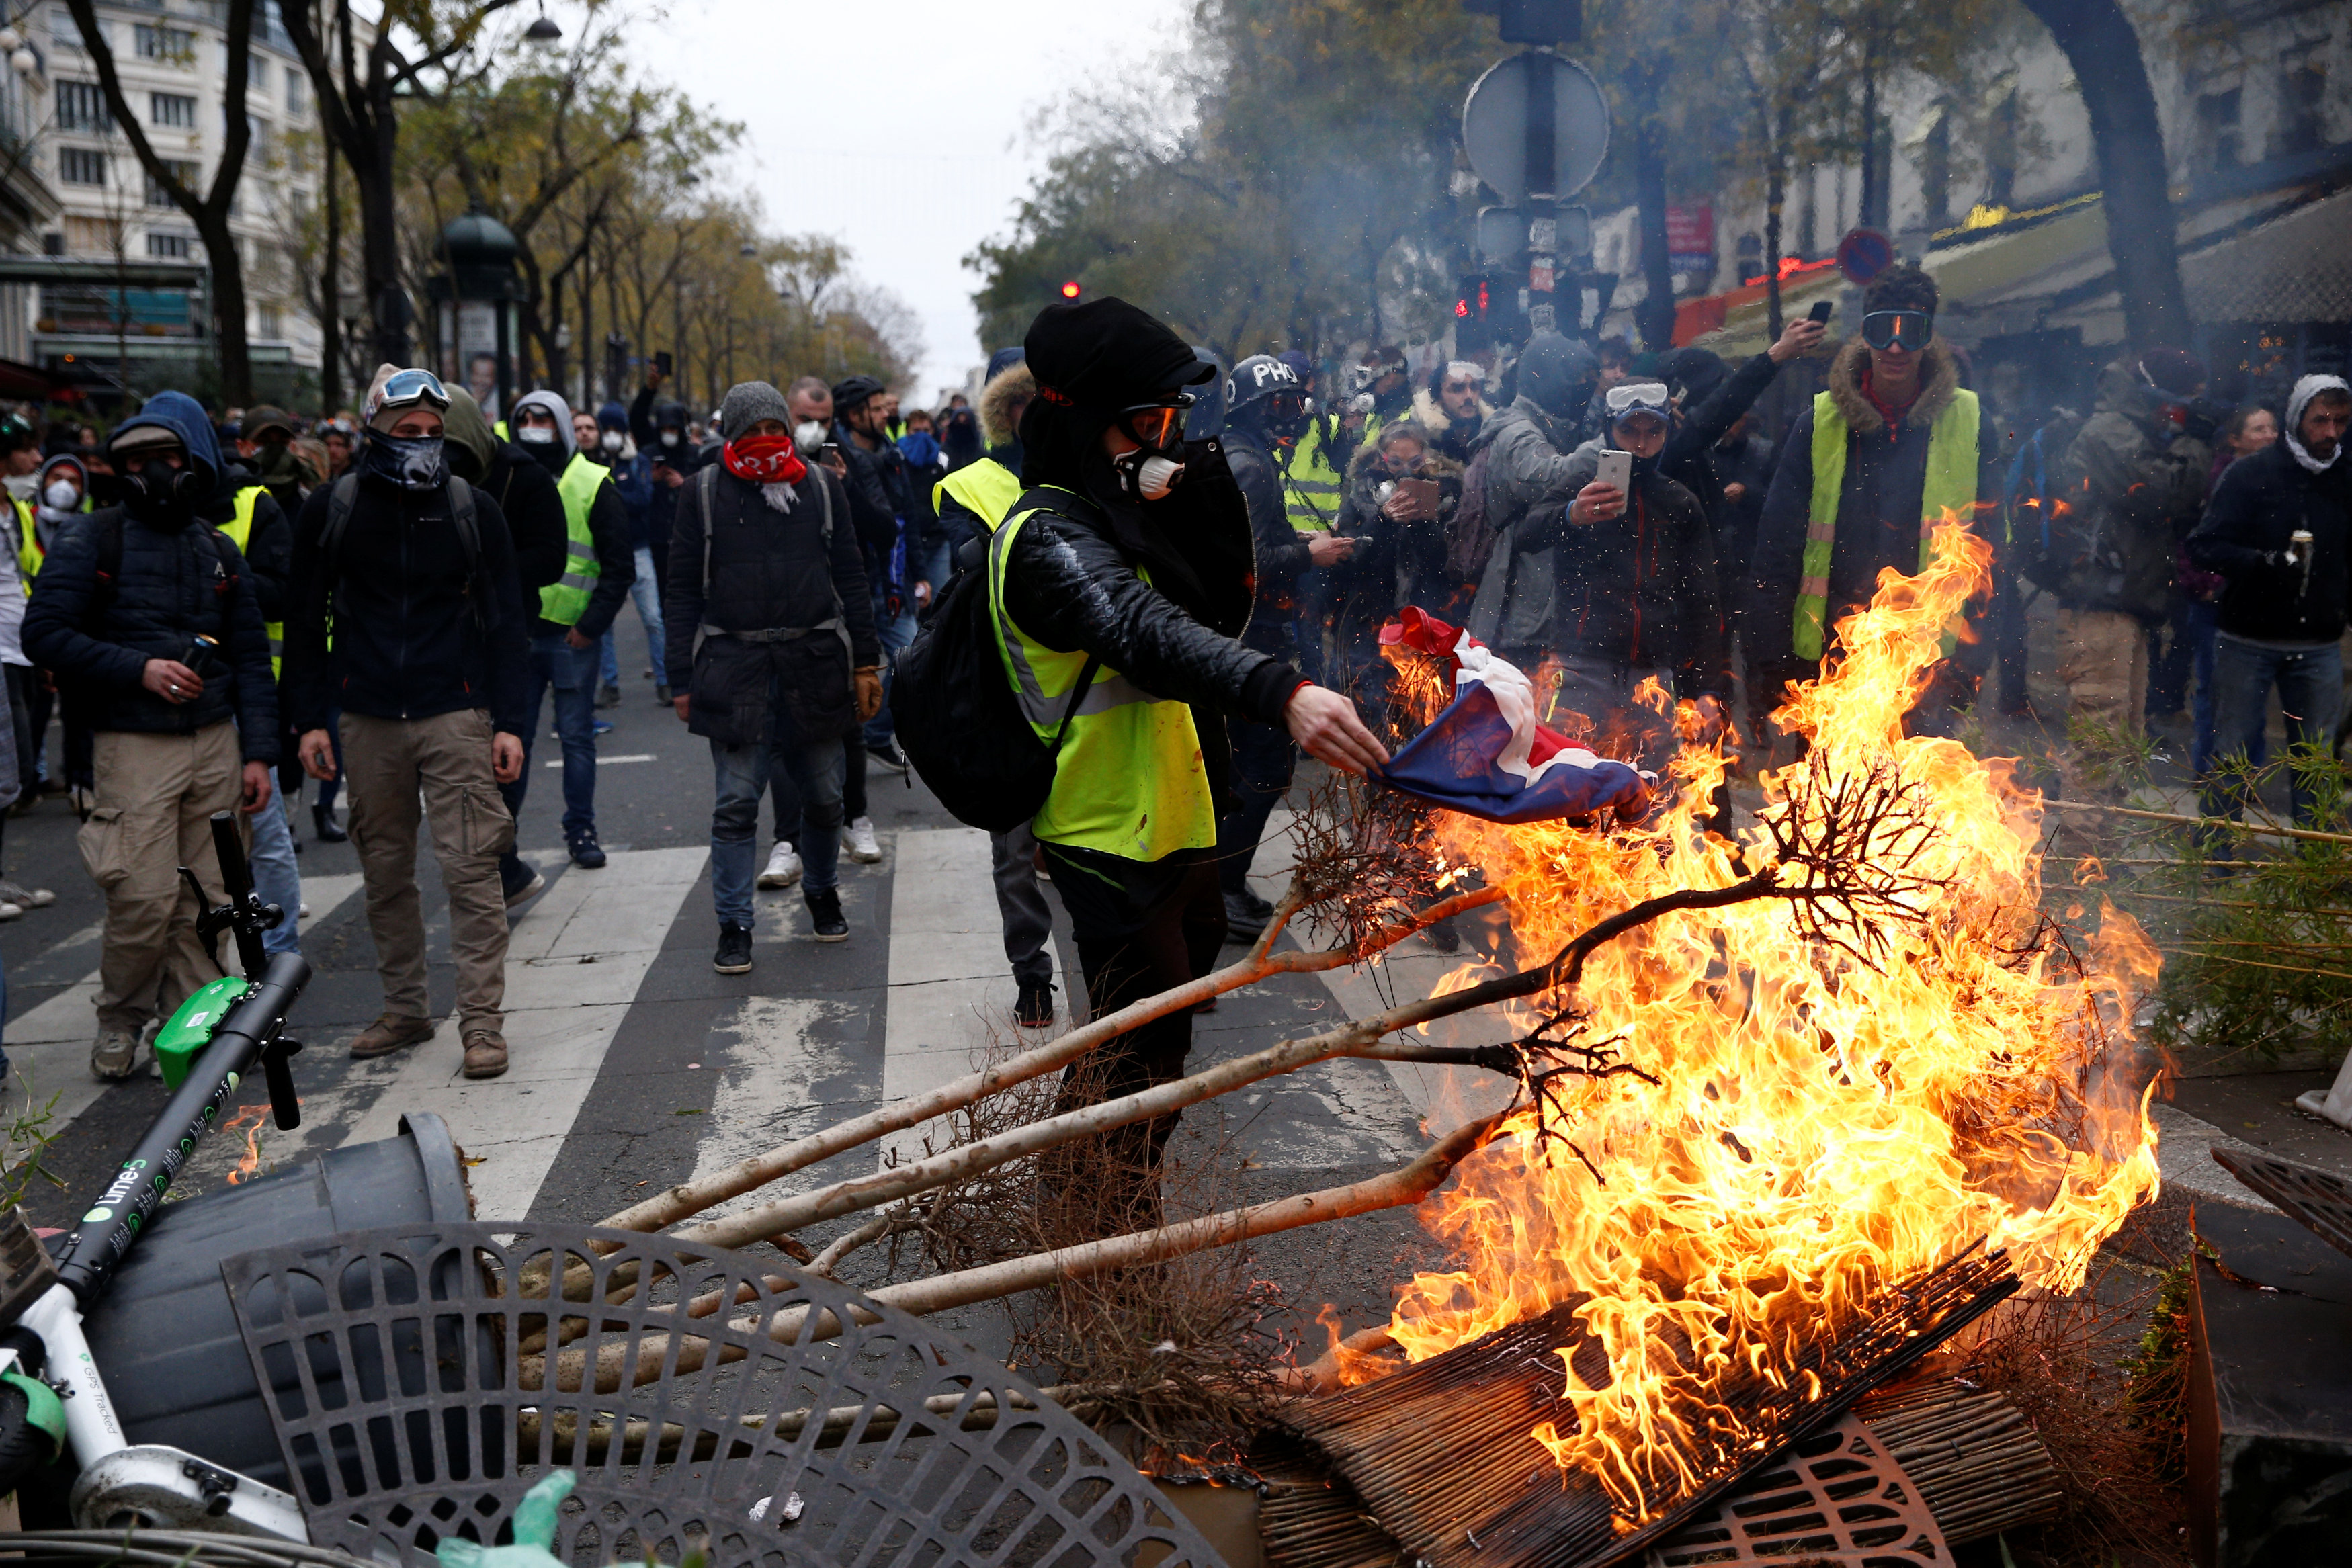 2018-12-08T122722Z_2092653464_RC13AE960D00_RTRMADP_3_FRANCE-PROTESTS